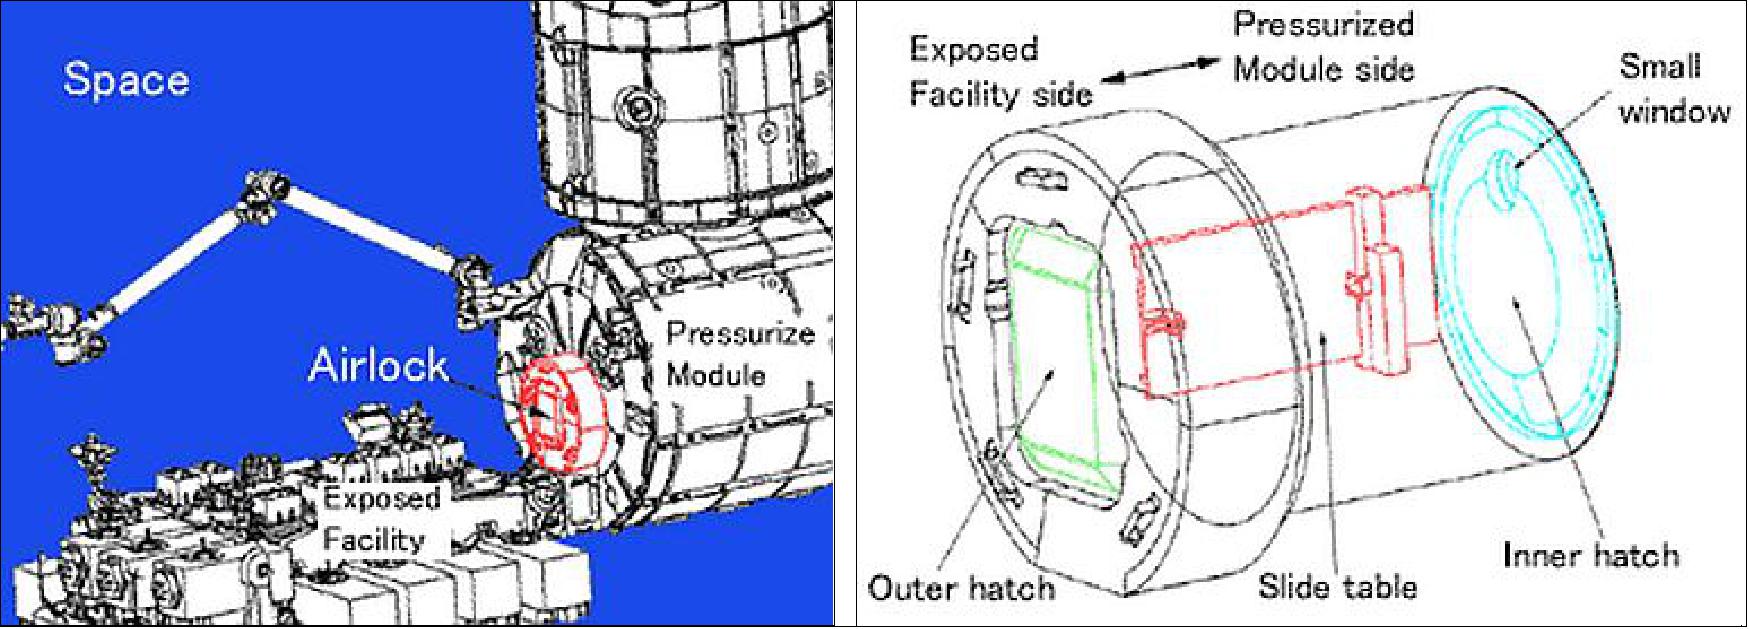 Figure 20: Schematic view of the Kibo PM and EF with the Airlock location in the PM (left), and the Airlock system layout (right), image credit: JAXA